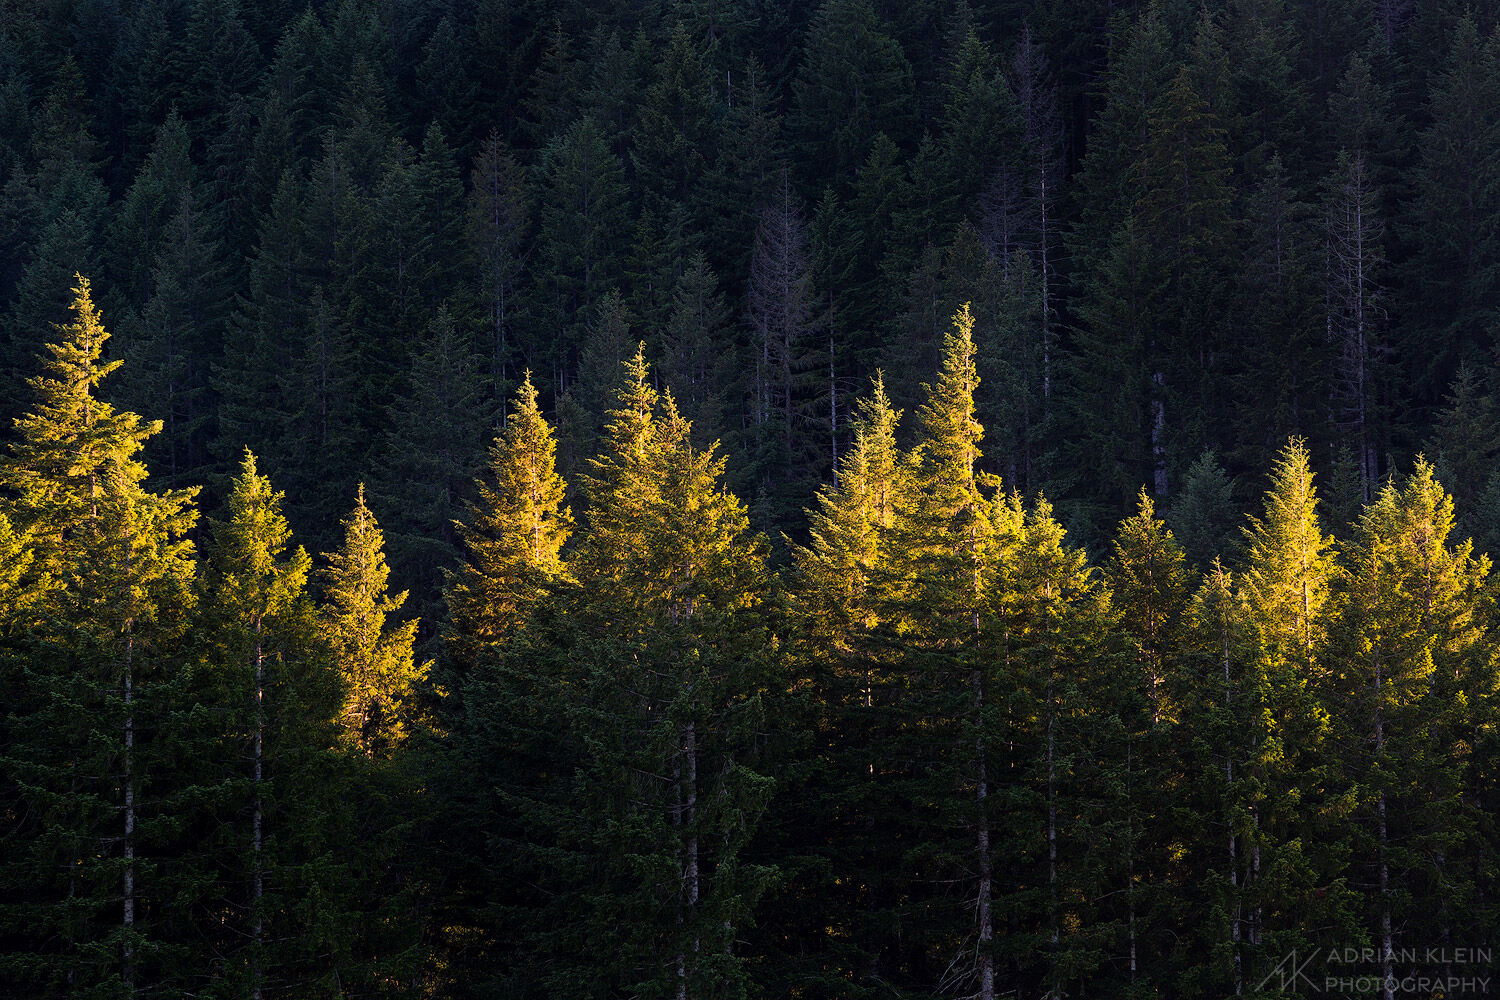 The tips of evergreen trees in Washington at sunset, standing tall for the last of the sunlight. Limited Edition of 50.